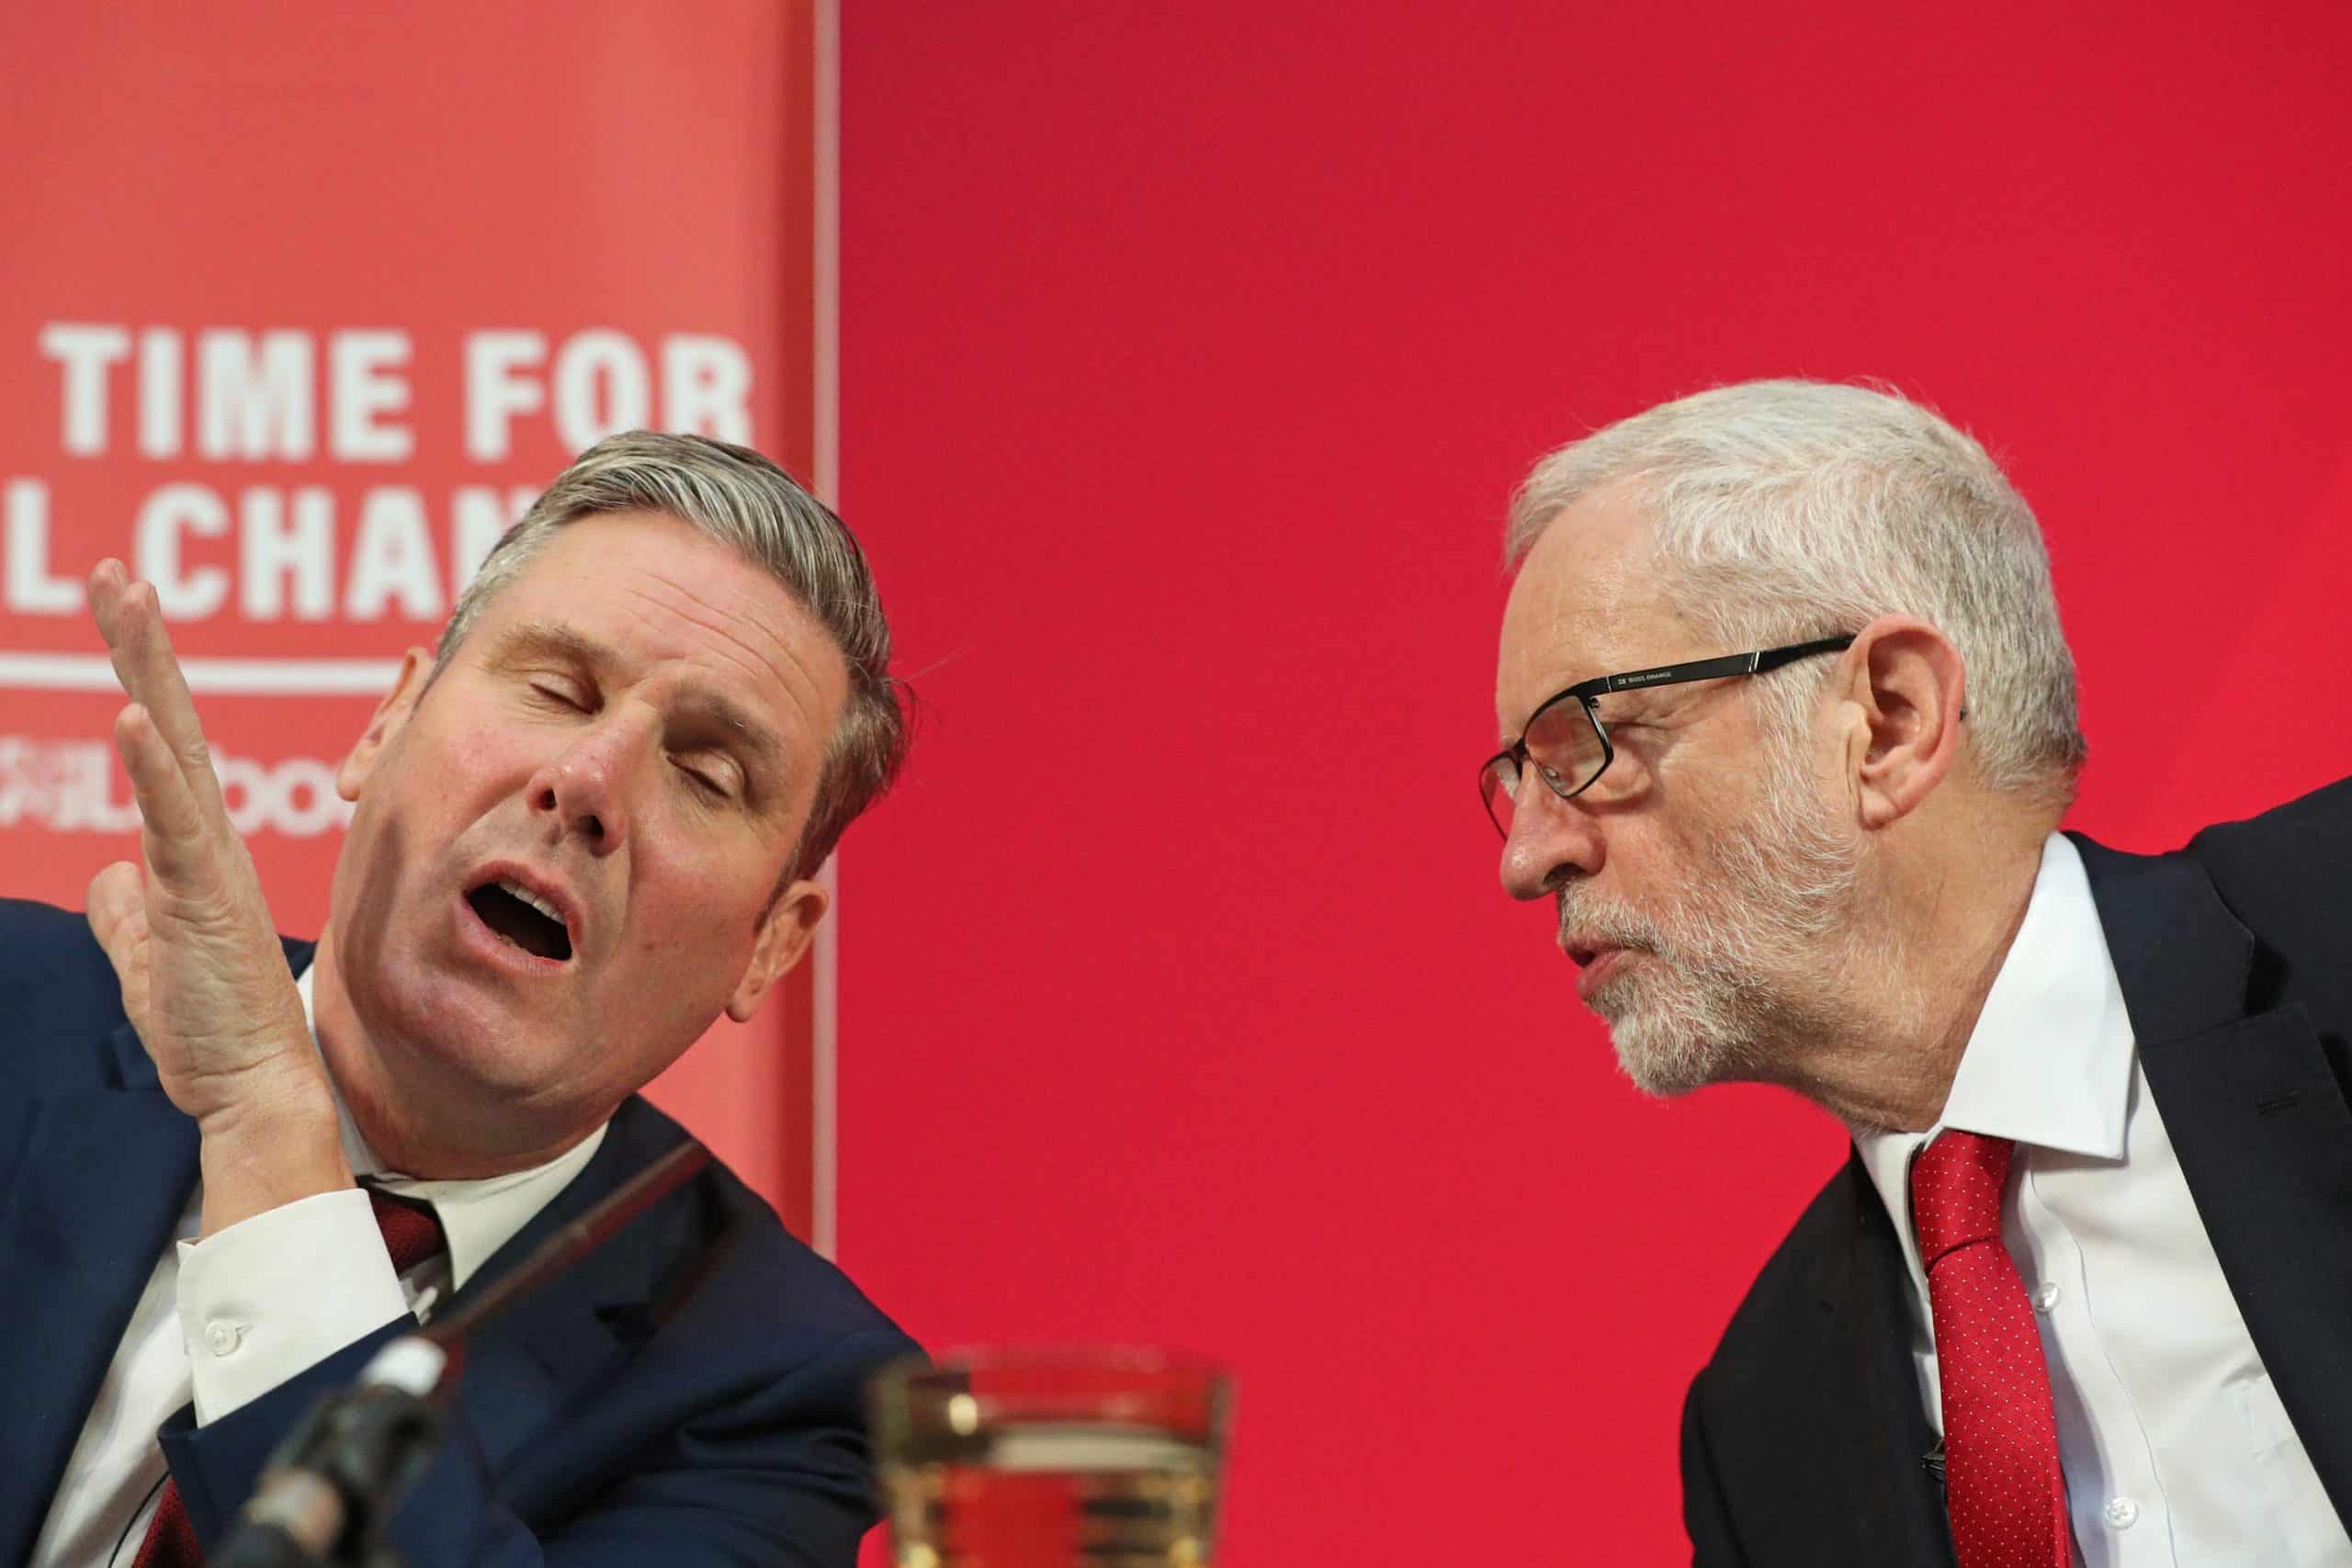 Labour’s ship could ‘go under’ with Starmer at the helm- McCluskey